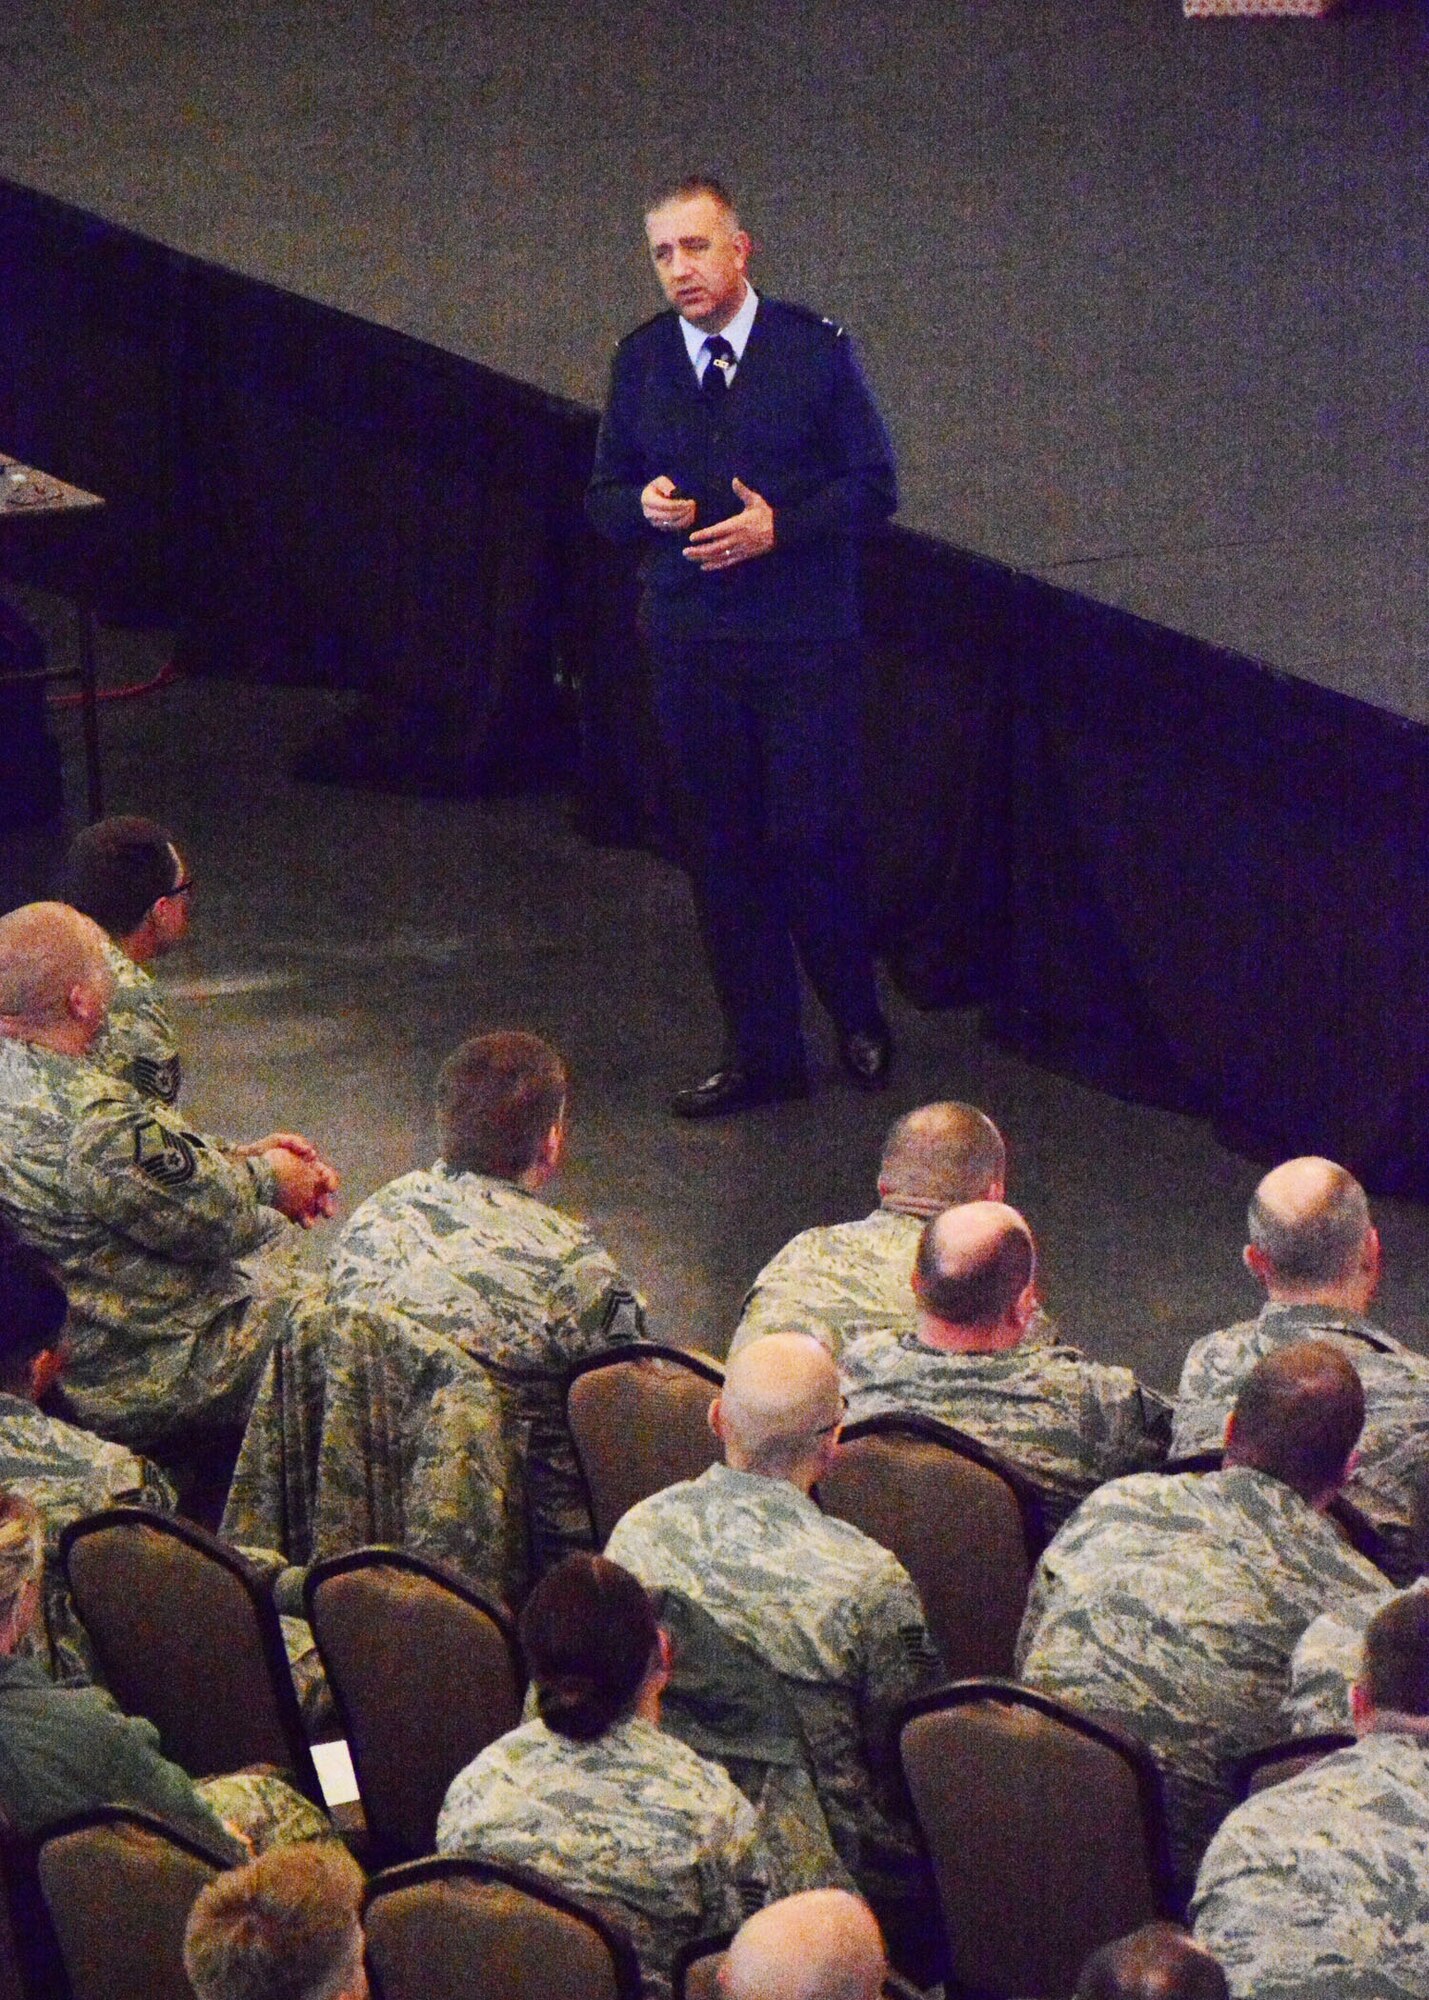 Individual Mobility Augmentee to the Director of the Profession of Arms Center of Excellence (PACE), Col. Richard Tatem, speaks to 120th Airlift Wing Airmen during the Wingman Day event held at the Mansfield Convention Center in Great Falls, Mont., on Dec. 5, 2015. (U.S. Air National Guard photo by Senior Master Sgt. Eric Peterson/Released)